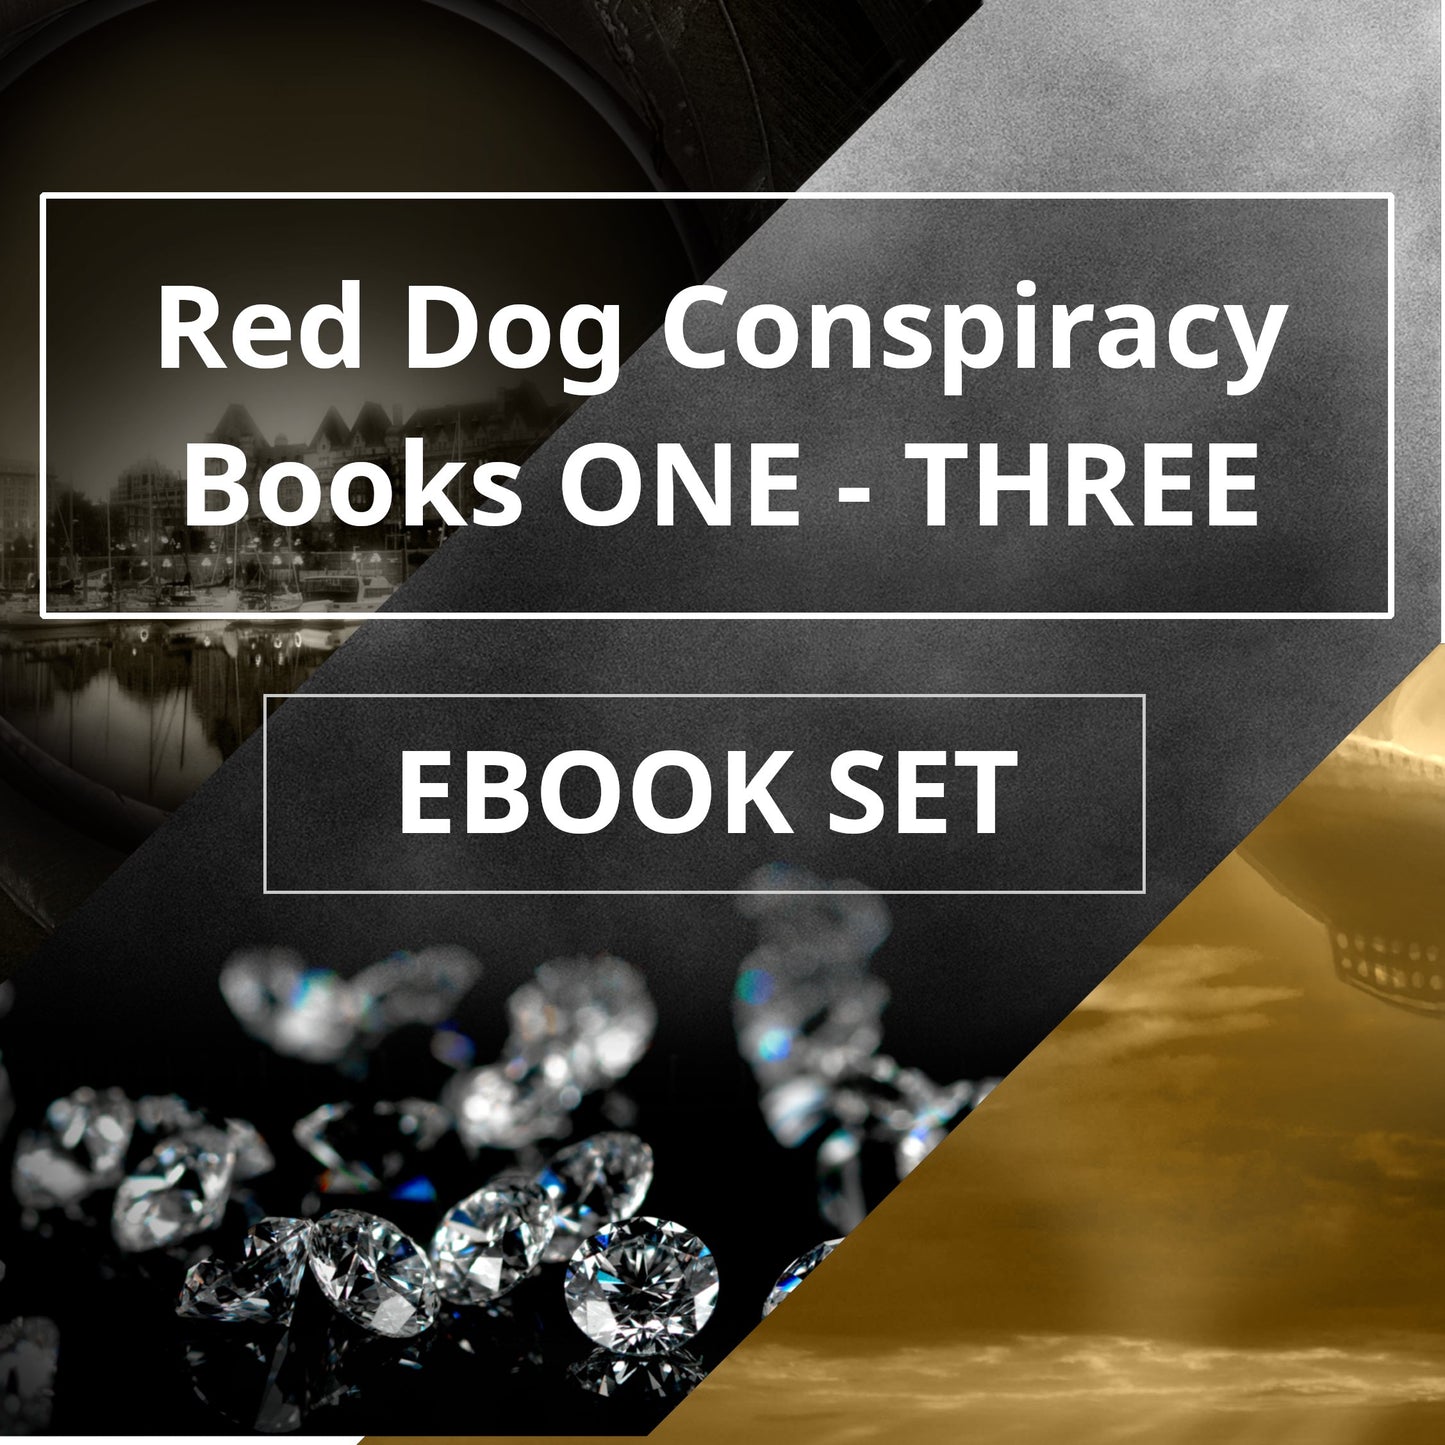 Red Dog Conspiracy Act 1 ebook - Patricia Loofbourrow